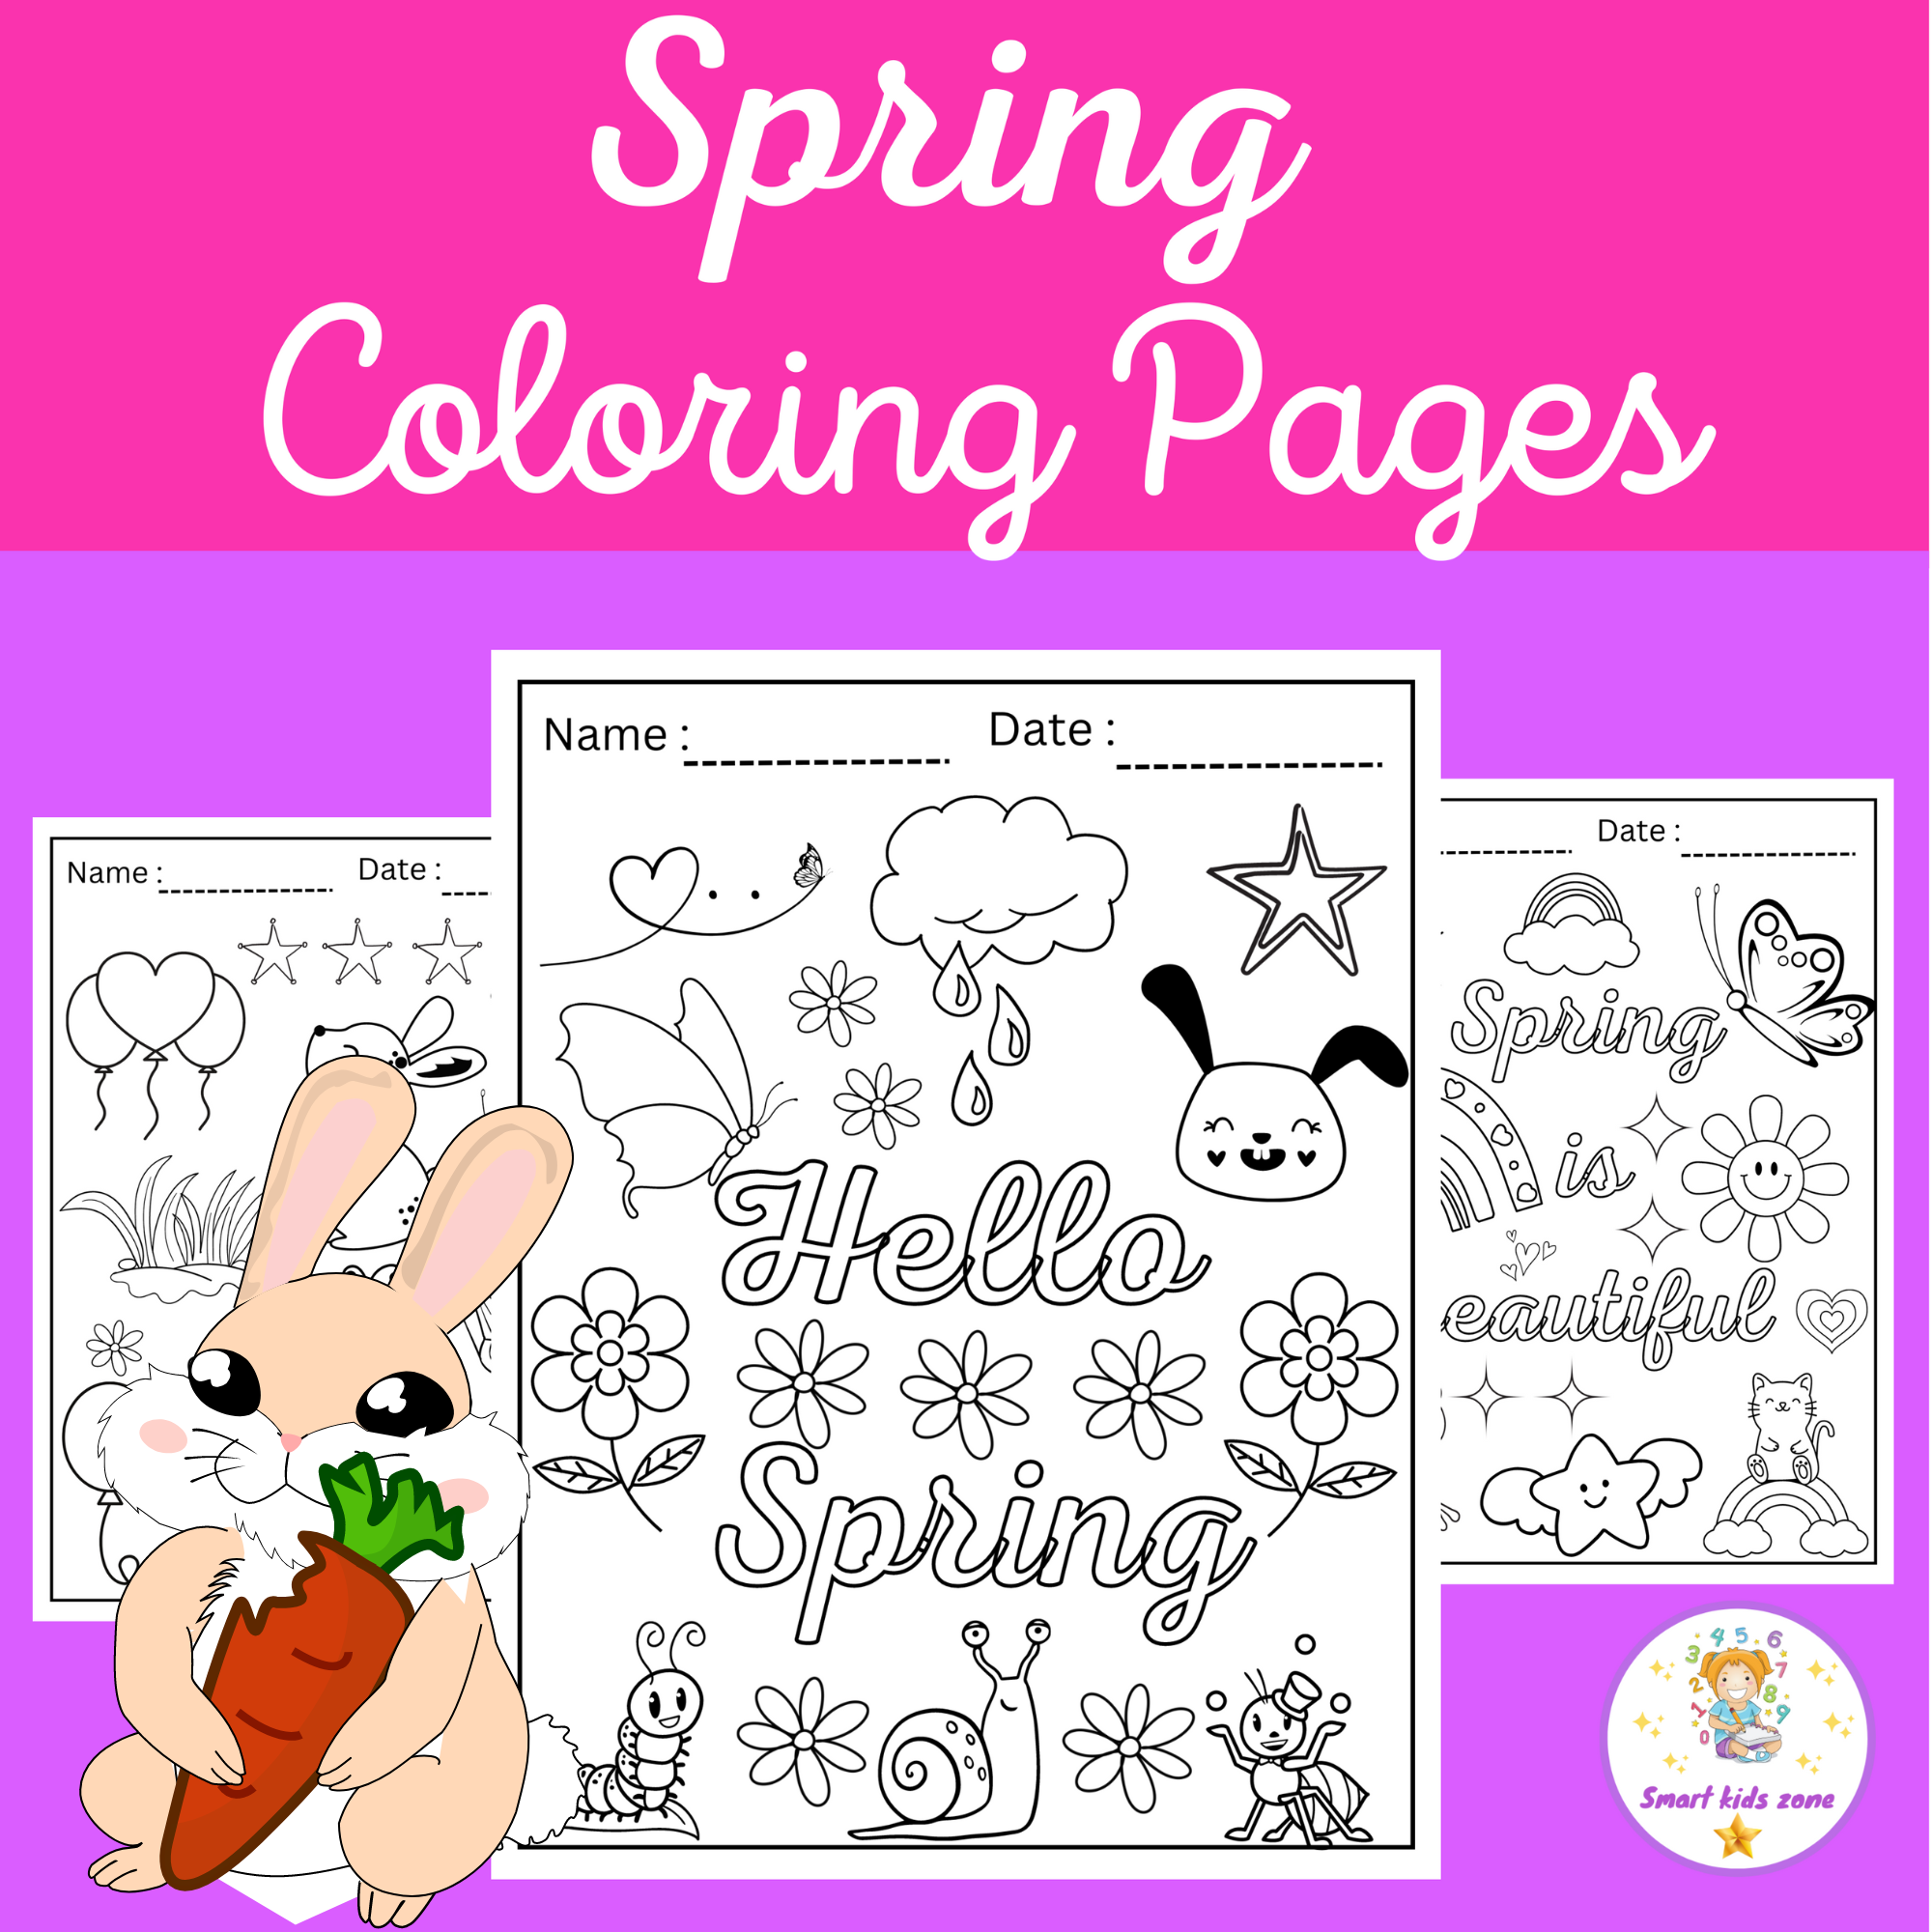 Fun spring coloring pages first day of spring coloring pages easter made by teachers